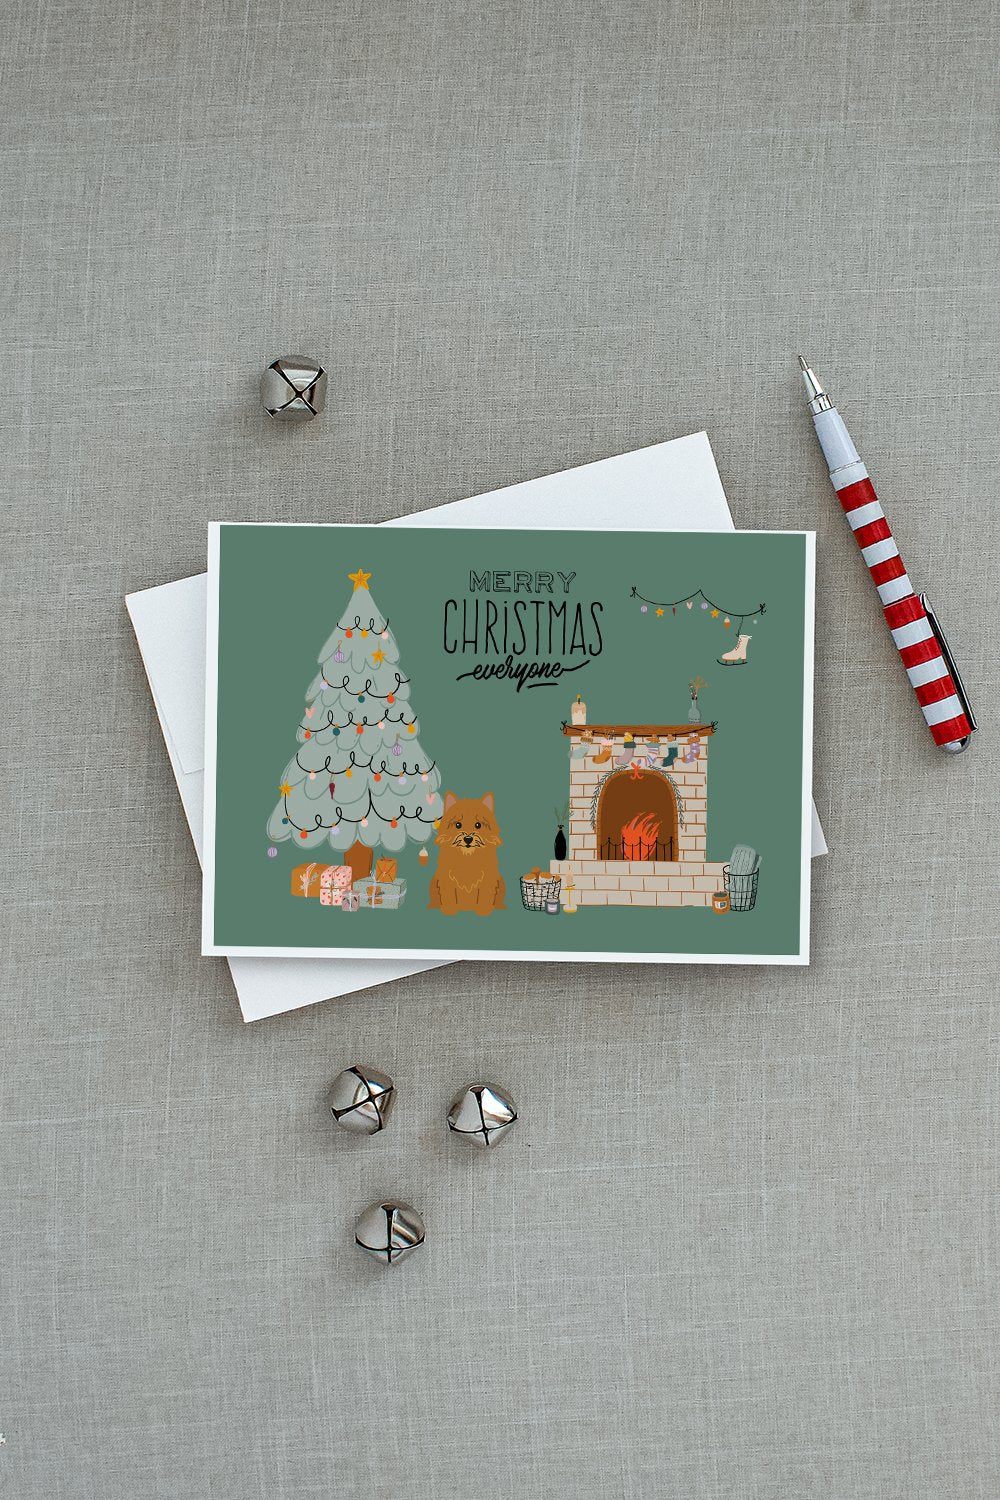 Norwich Terrier Christmas Everyone Greeting Cards and Envelopes Pack of 8 - the-store.com